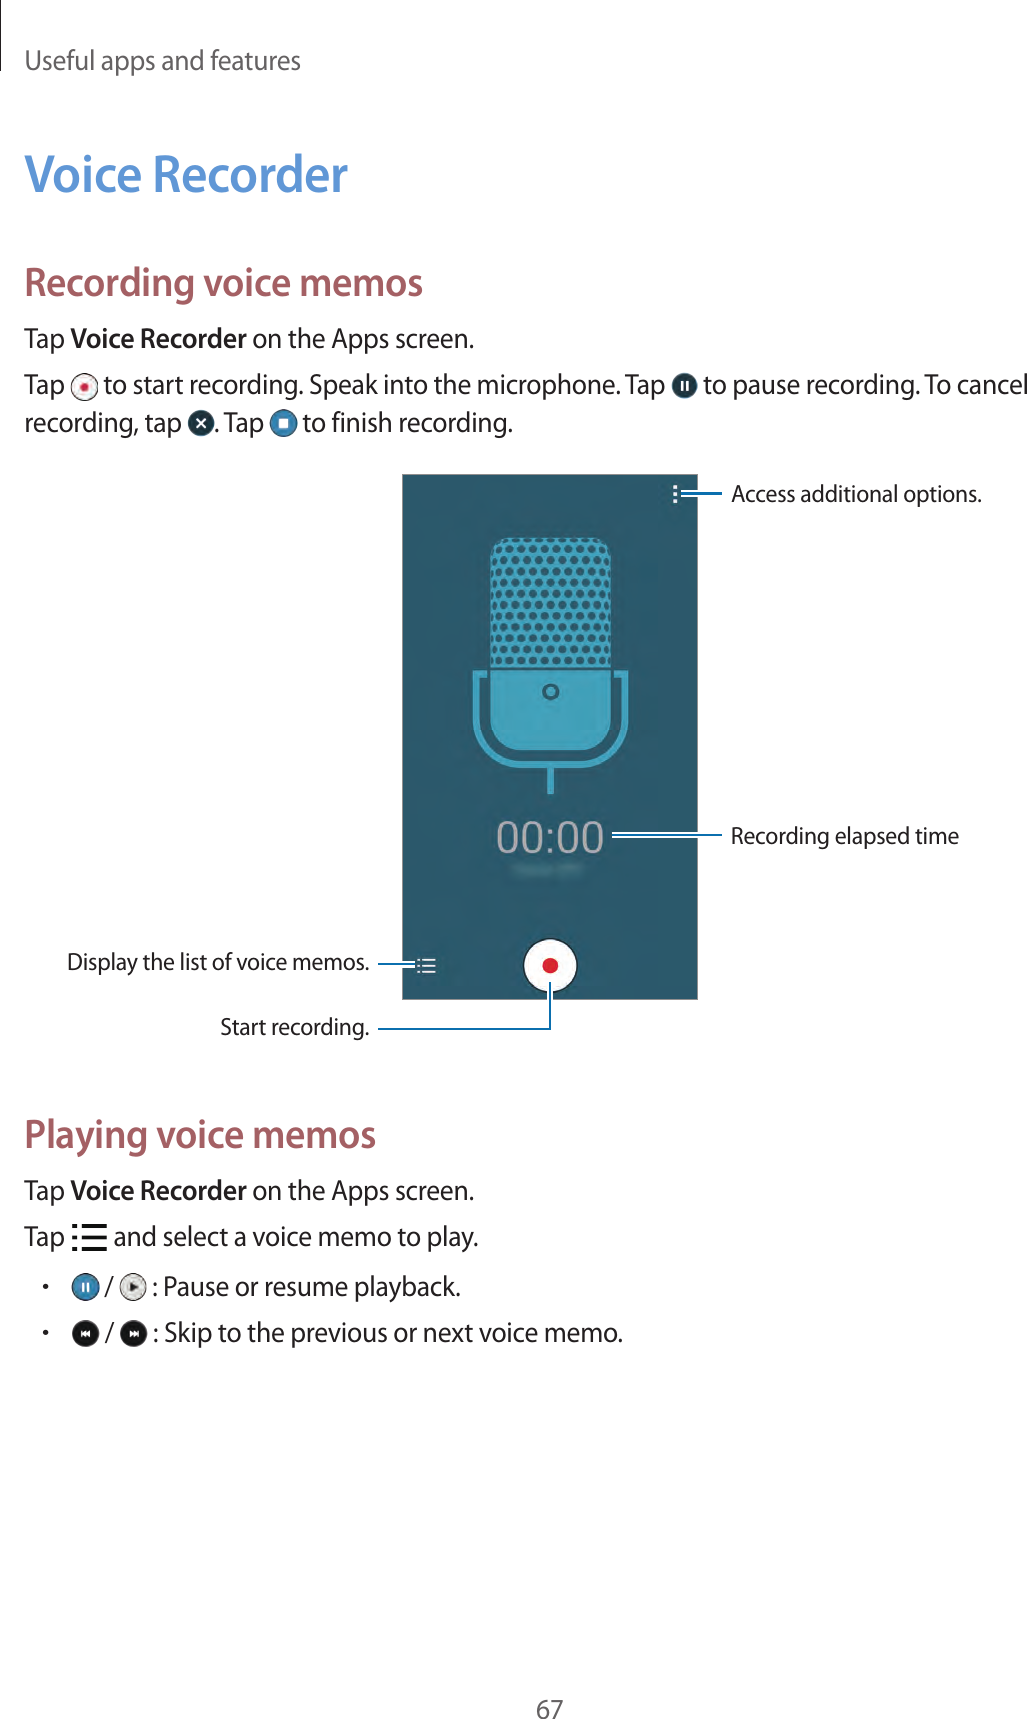 Useful apps and features67Voice RecorderRecording voice memosTap Voice Recorder on the Apps screen.Tap   to start recording. Speak into the microphone. Tap   to pause recording. To cancel recording, tap  . Tap   to finish recording.Display the list of voice memos.Access additional options.Start recording.Recording elapsed timePlaying voice memosTap Voice Recorder on the Apps screen.Tap   and select a voice memo to play.• /   : Pause or resume playback.• /   : Skip to the previous or next voice memo.